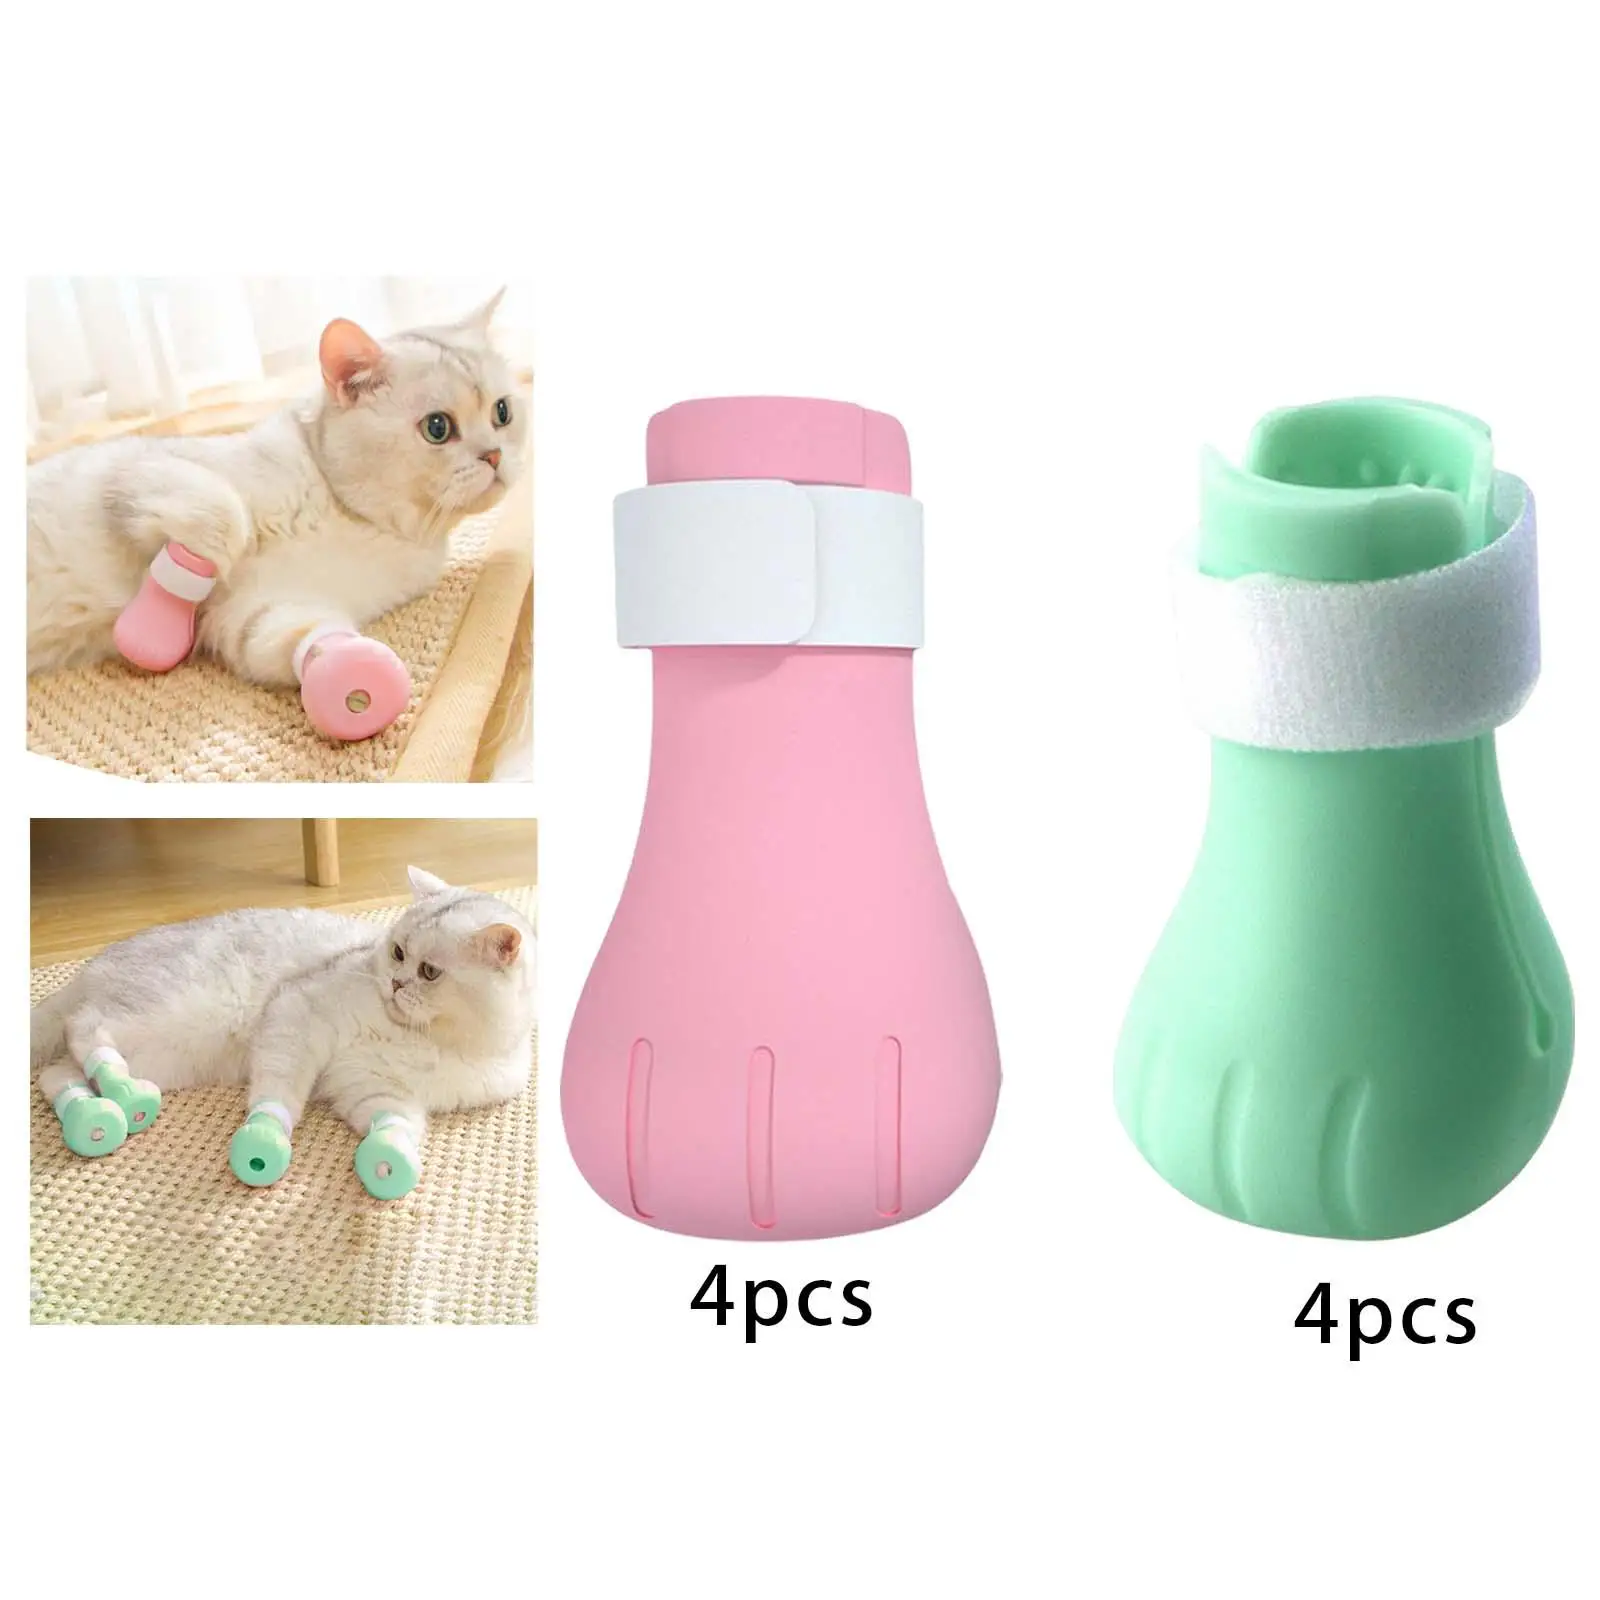 4Pieces Anti Scratch Cat Shoes Silicone Boots Cover, Silicone Gloves for Cat Claw, Used for Pet Grooming